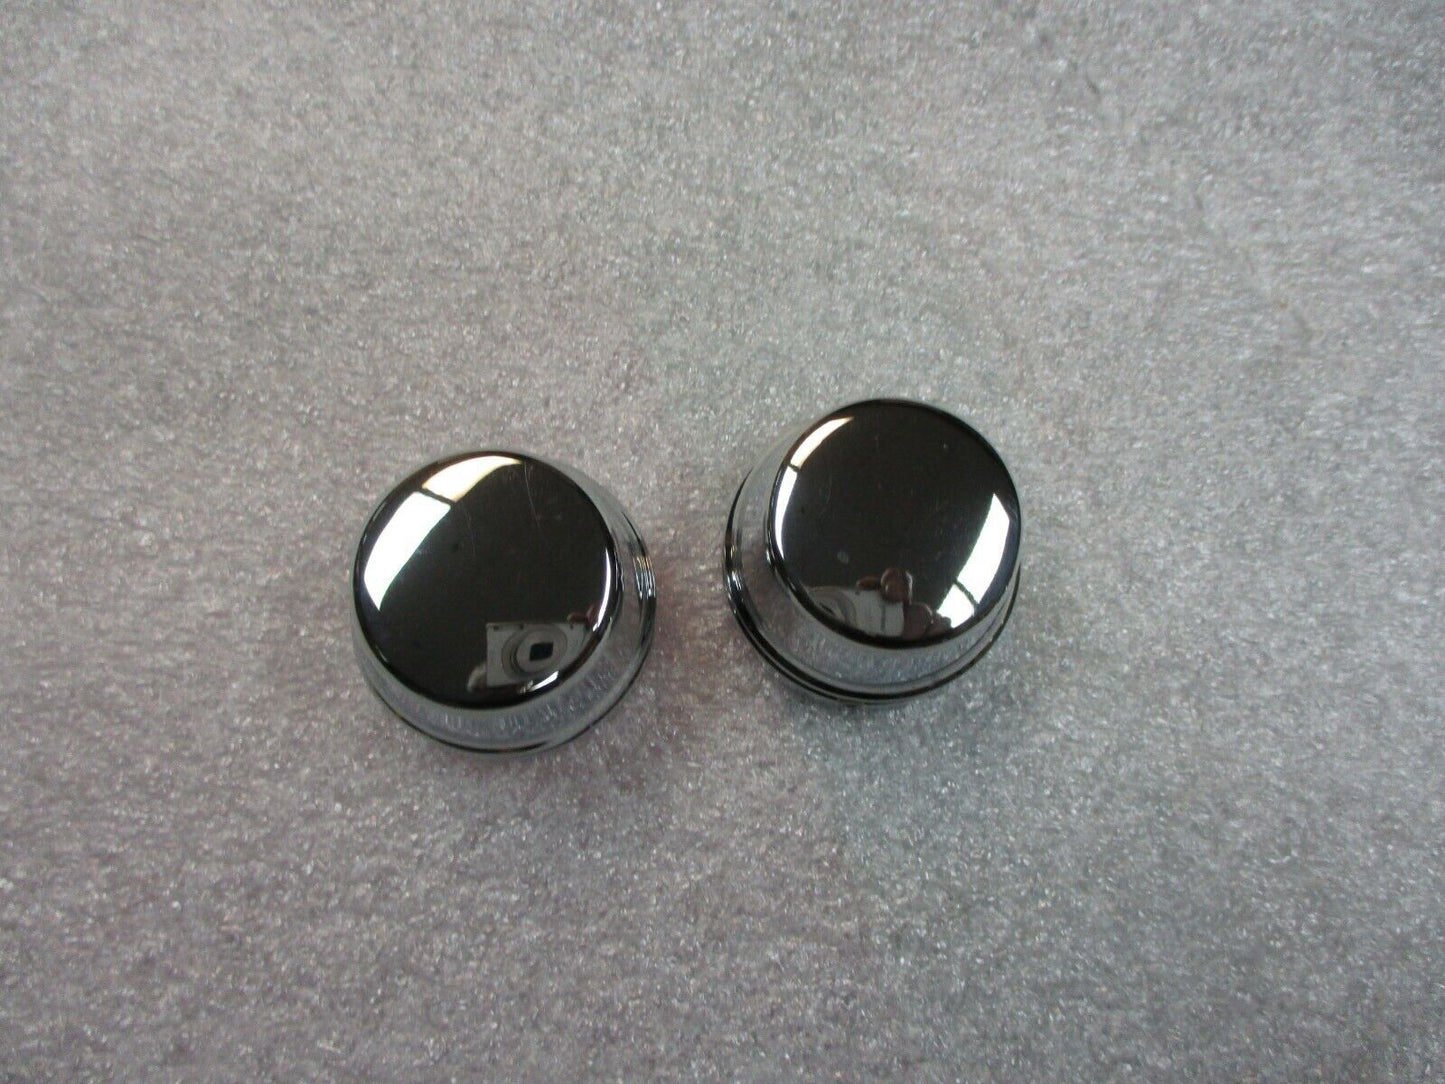 Harley Davidson OEM  Chrome Grooved  Axle Covers